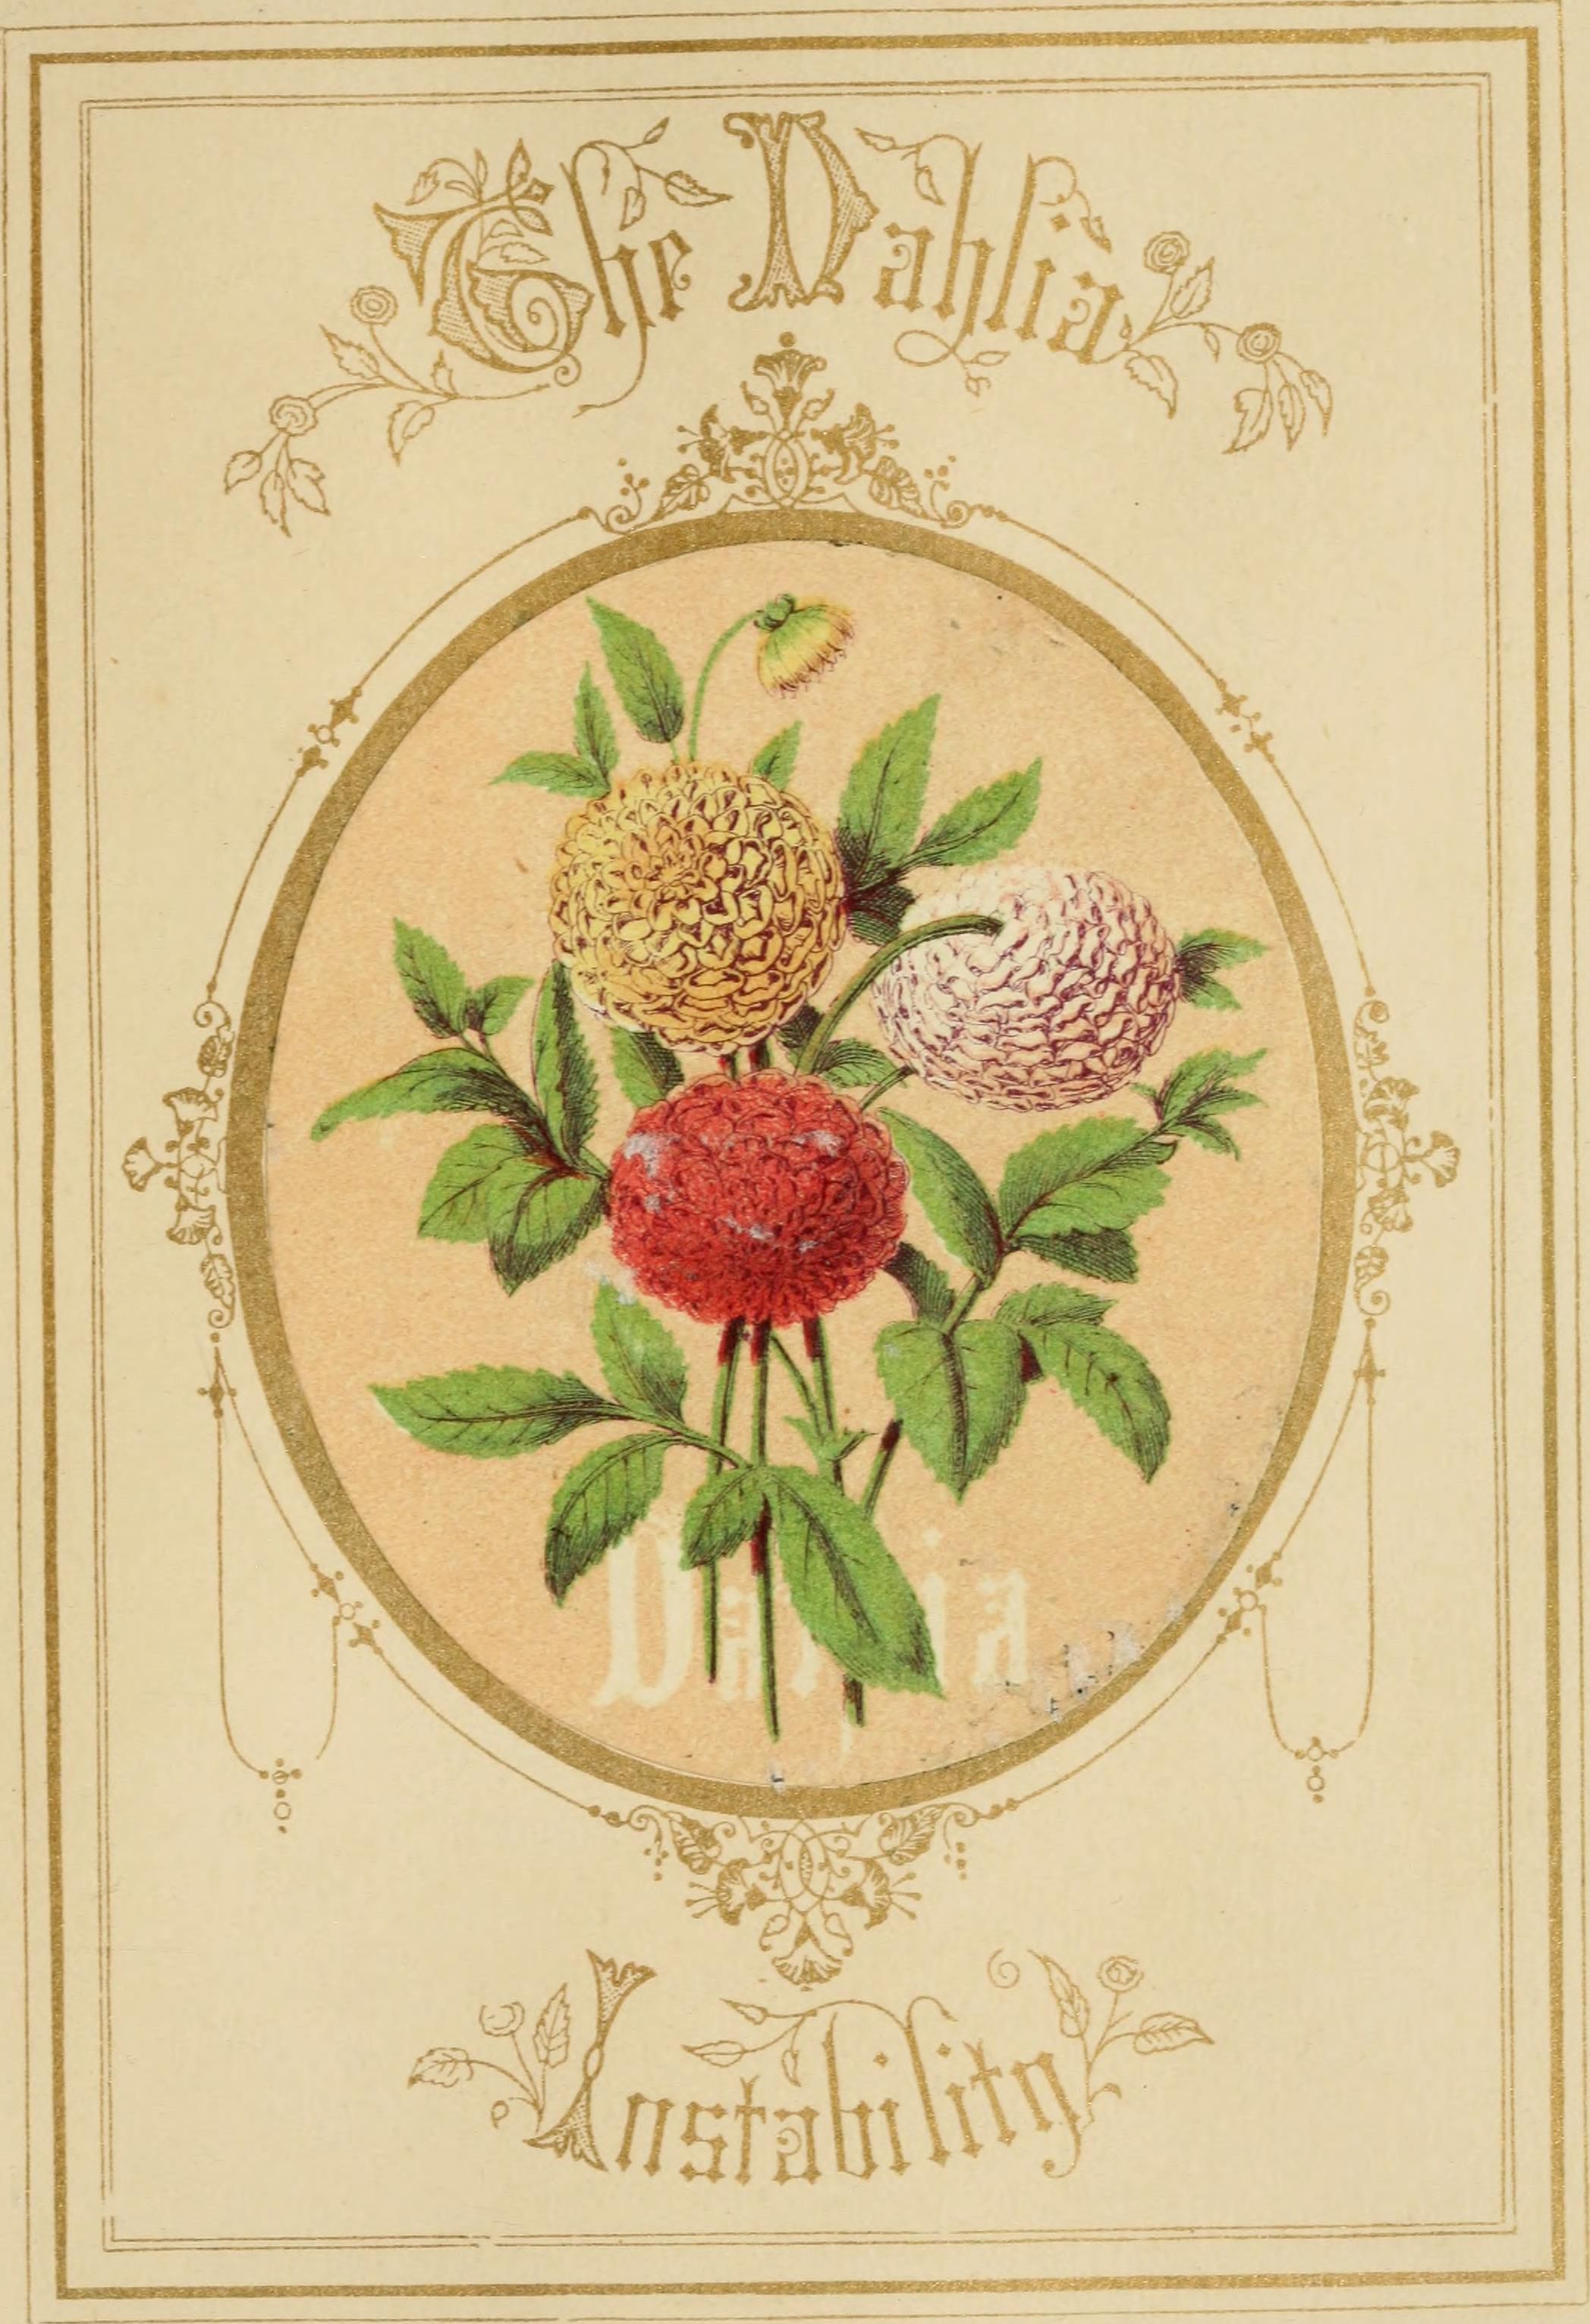 An illustration from “The Language of Flowers”, 1857.